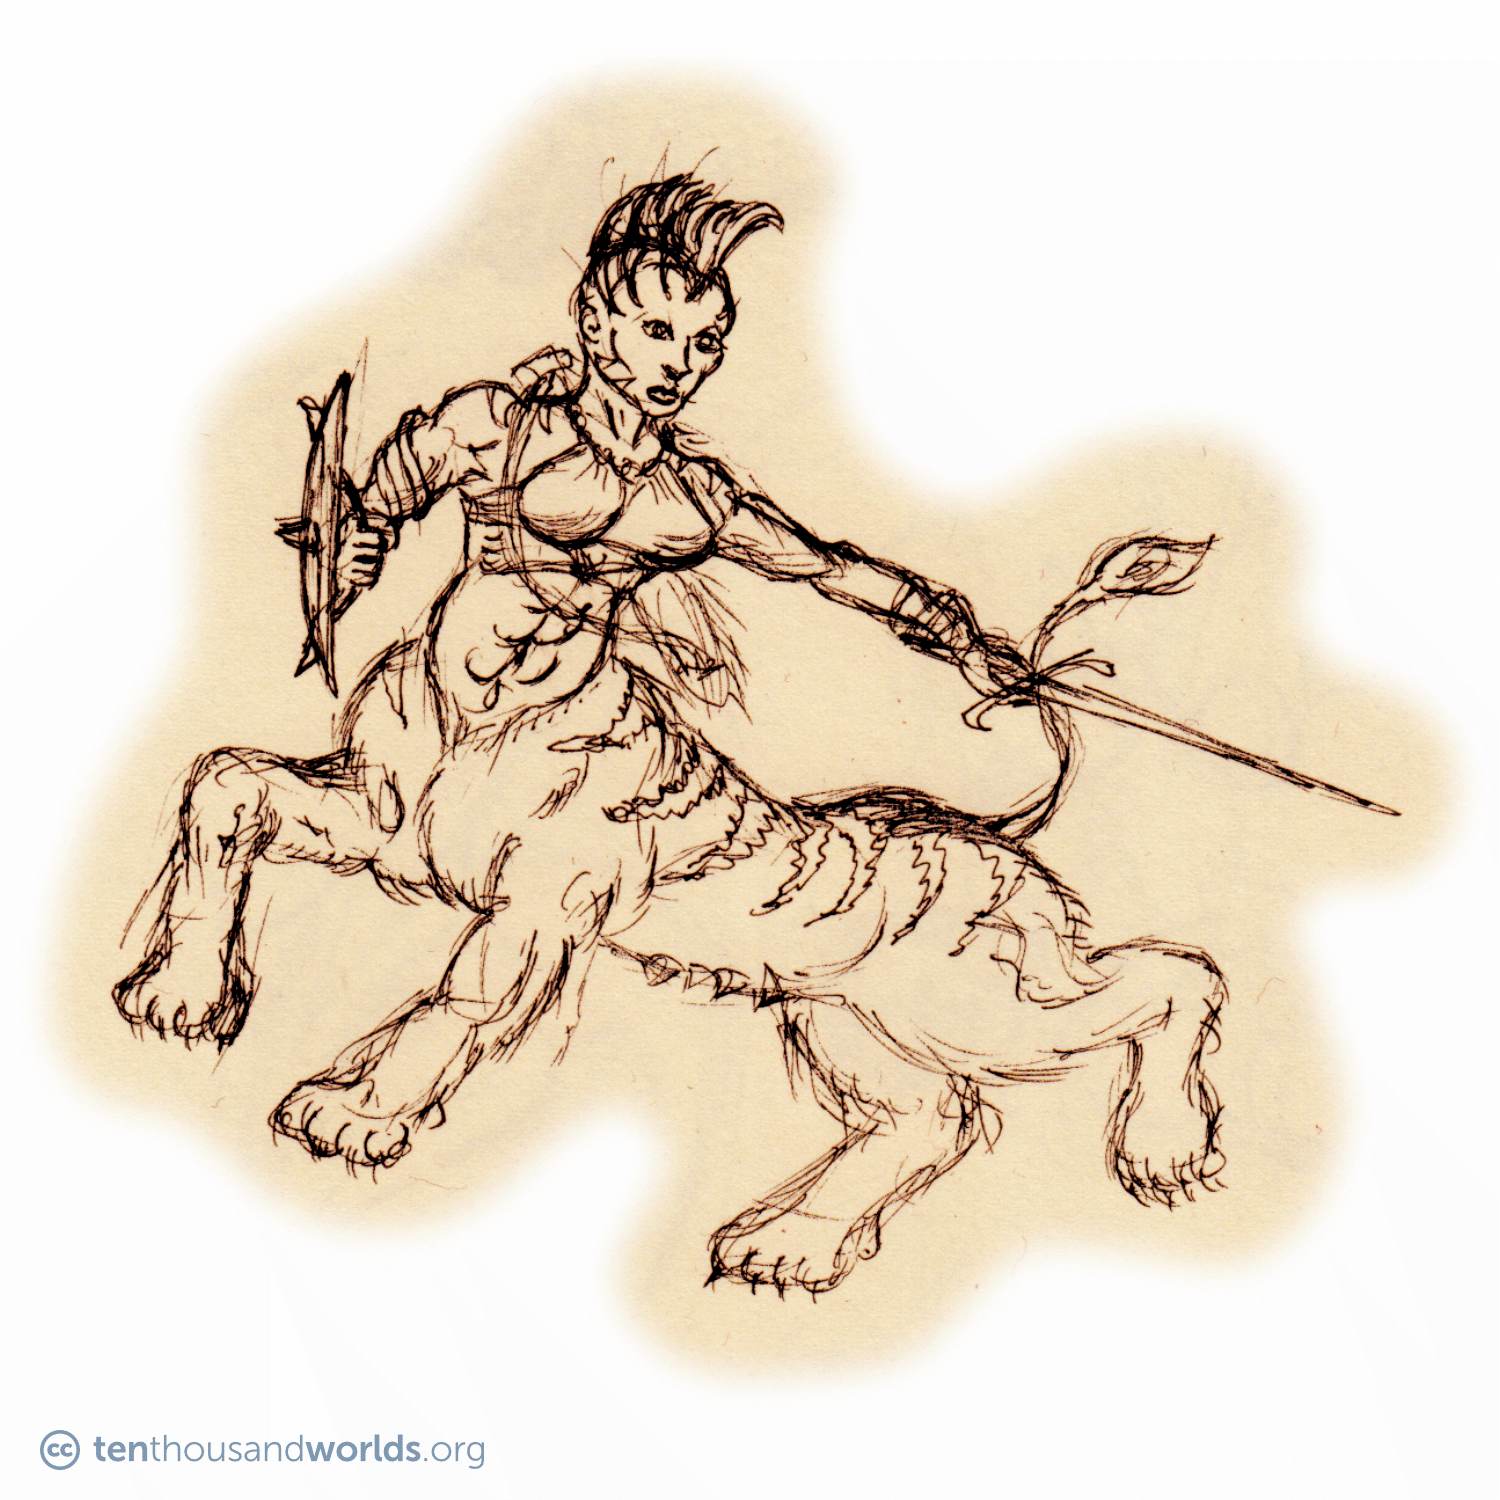 A pencil sketch of a human-tiger centaur-like chimera. The human part sports a “mohawk” hair-style, and tiger stripes appear along her exposed scalp and jawline. She holds a sword and a round shield in her human arms.